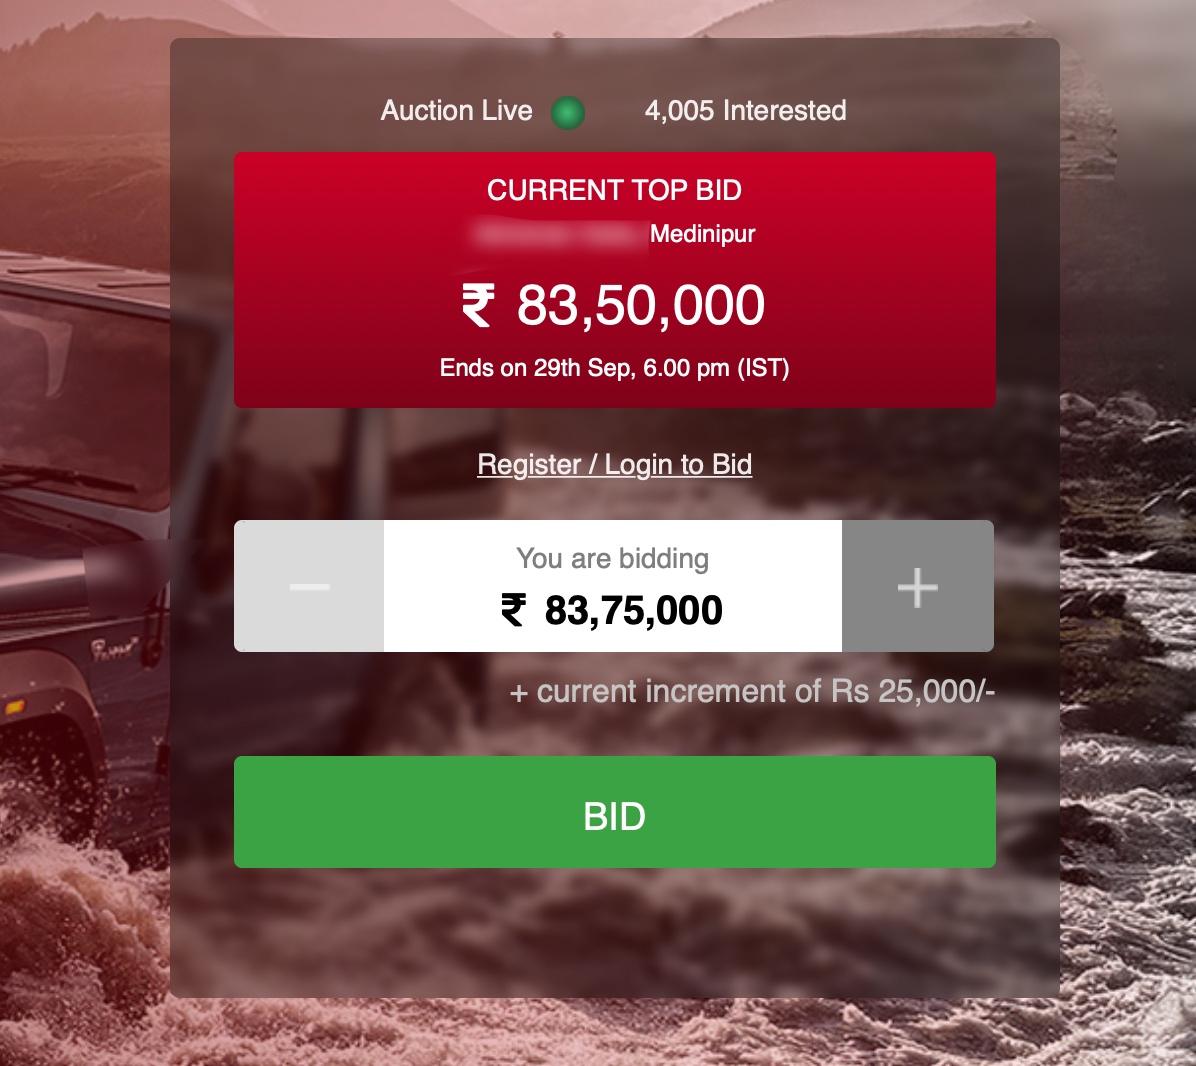 <p>On the second day of bidding, the auction has crossed over the Rs 80 lakh mark, and the current top bid of Rs 83.5 lakh comes from Medinipur (Midnapore) in West Bengal. At this rate, the auction certainly looks set to cross well over a crore of rupees!</p>